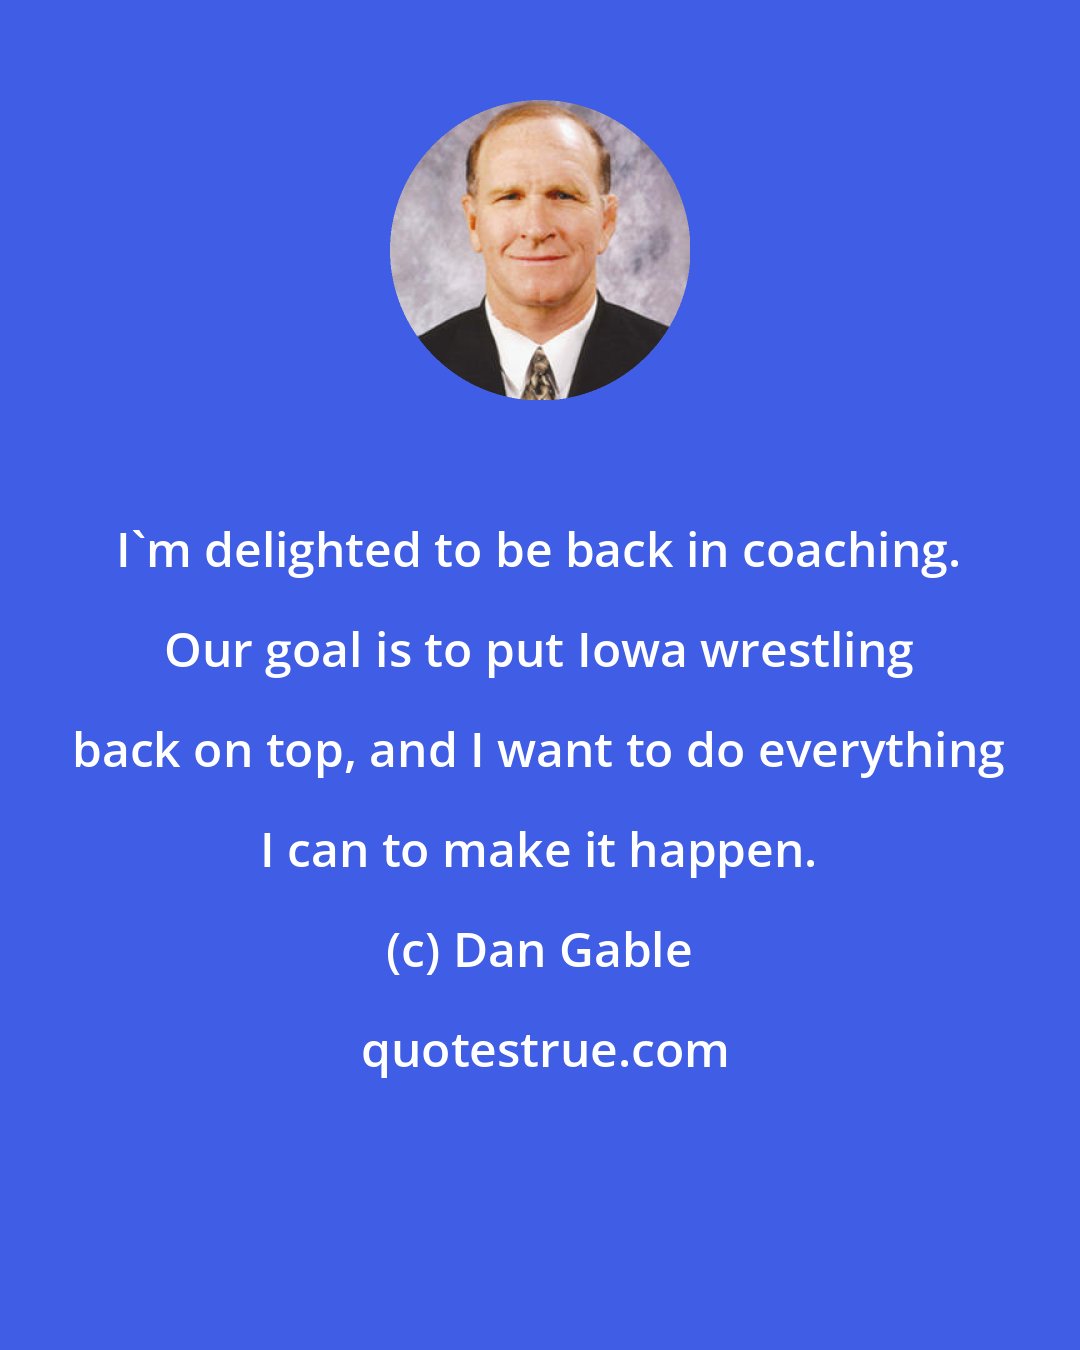 Dan Gable: I'm delighted to be back in coaching. Our goal is to put Iowa wrestling back on top, and I want to do everything I can to make it happen.